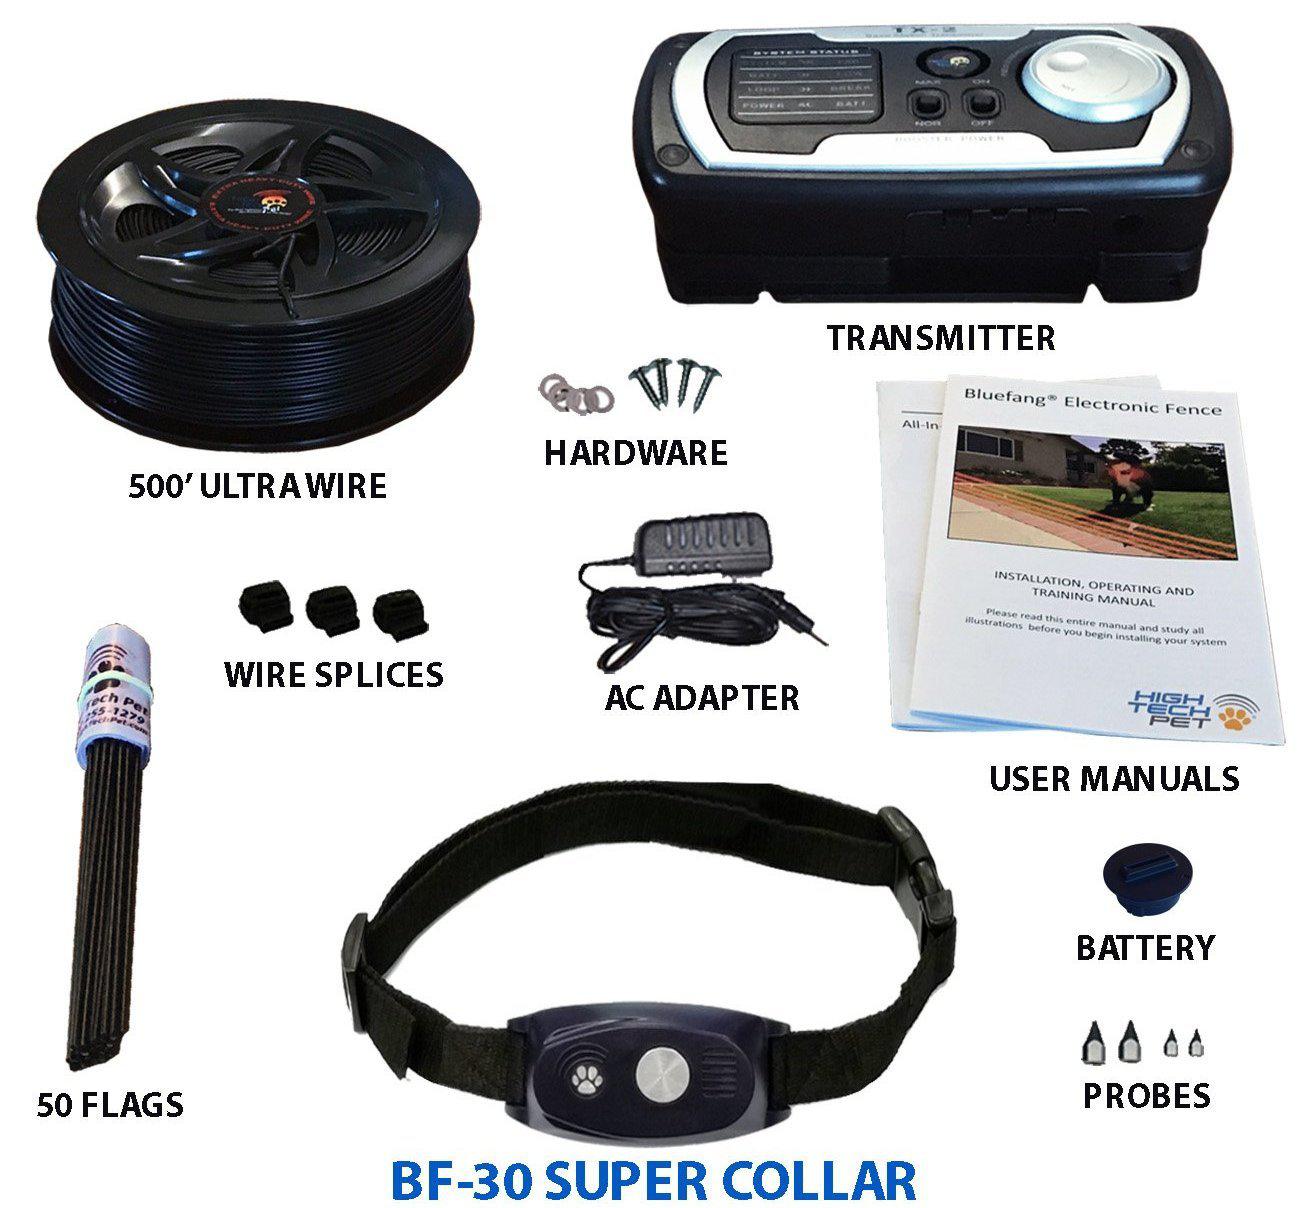 High Tech Pet Bluefang X-30 5-in-1 Remote Training And Electric Dog Fence Collar